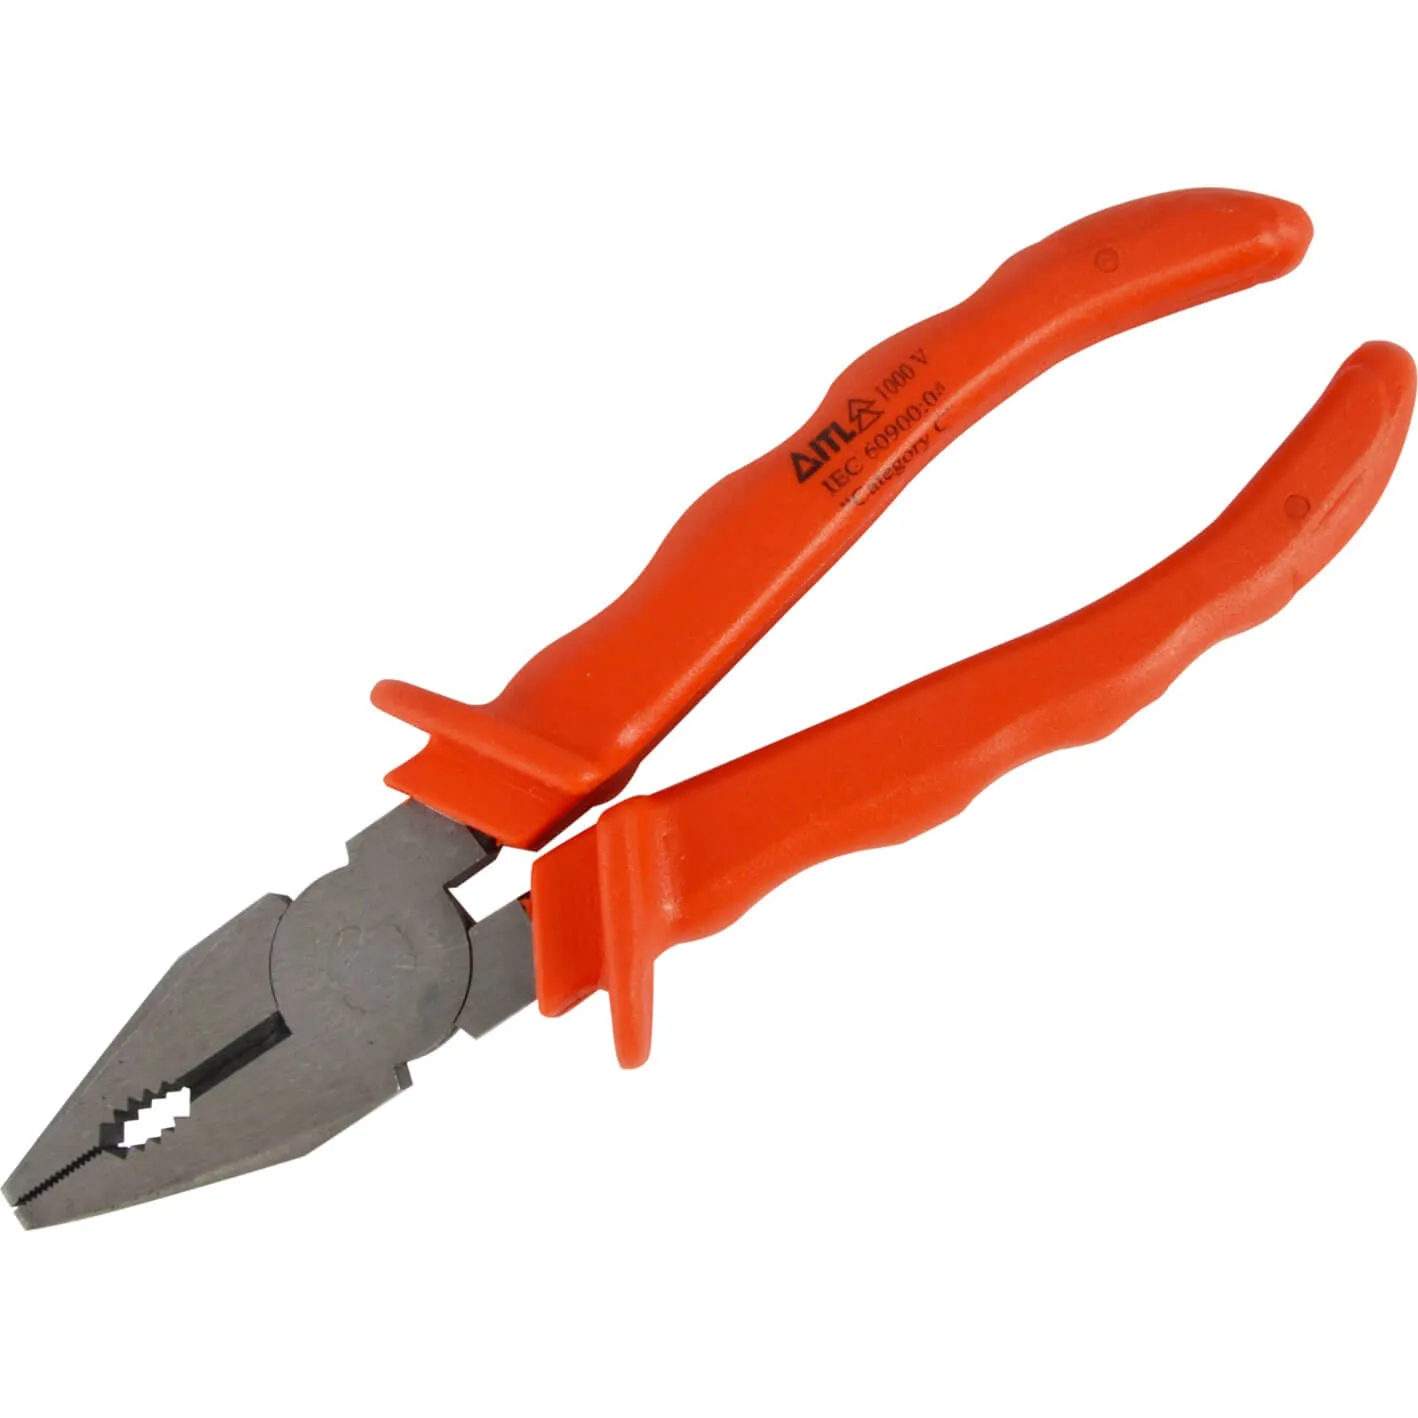 ITL Insulated Combination Pliers - 200mm